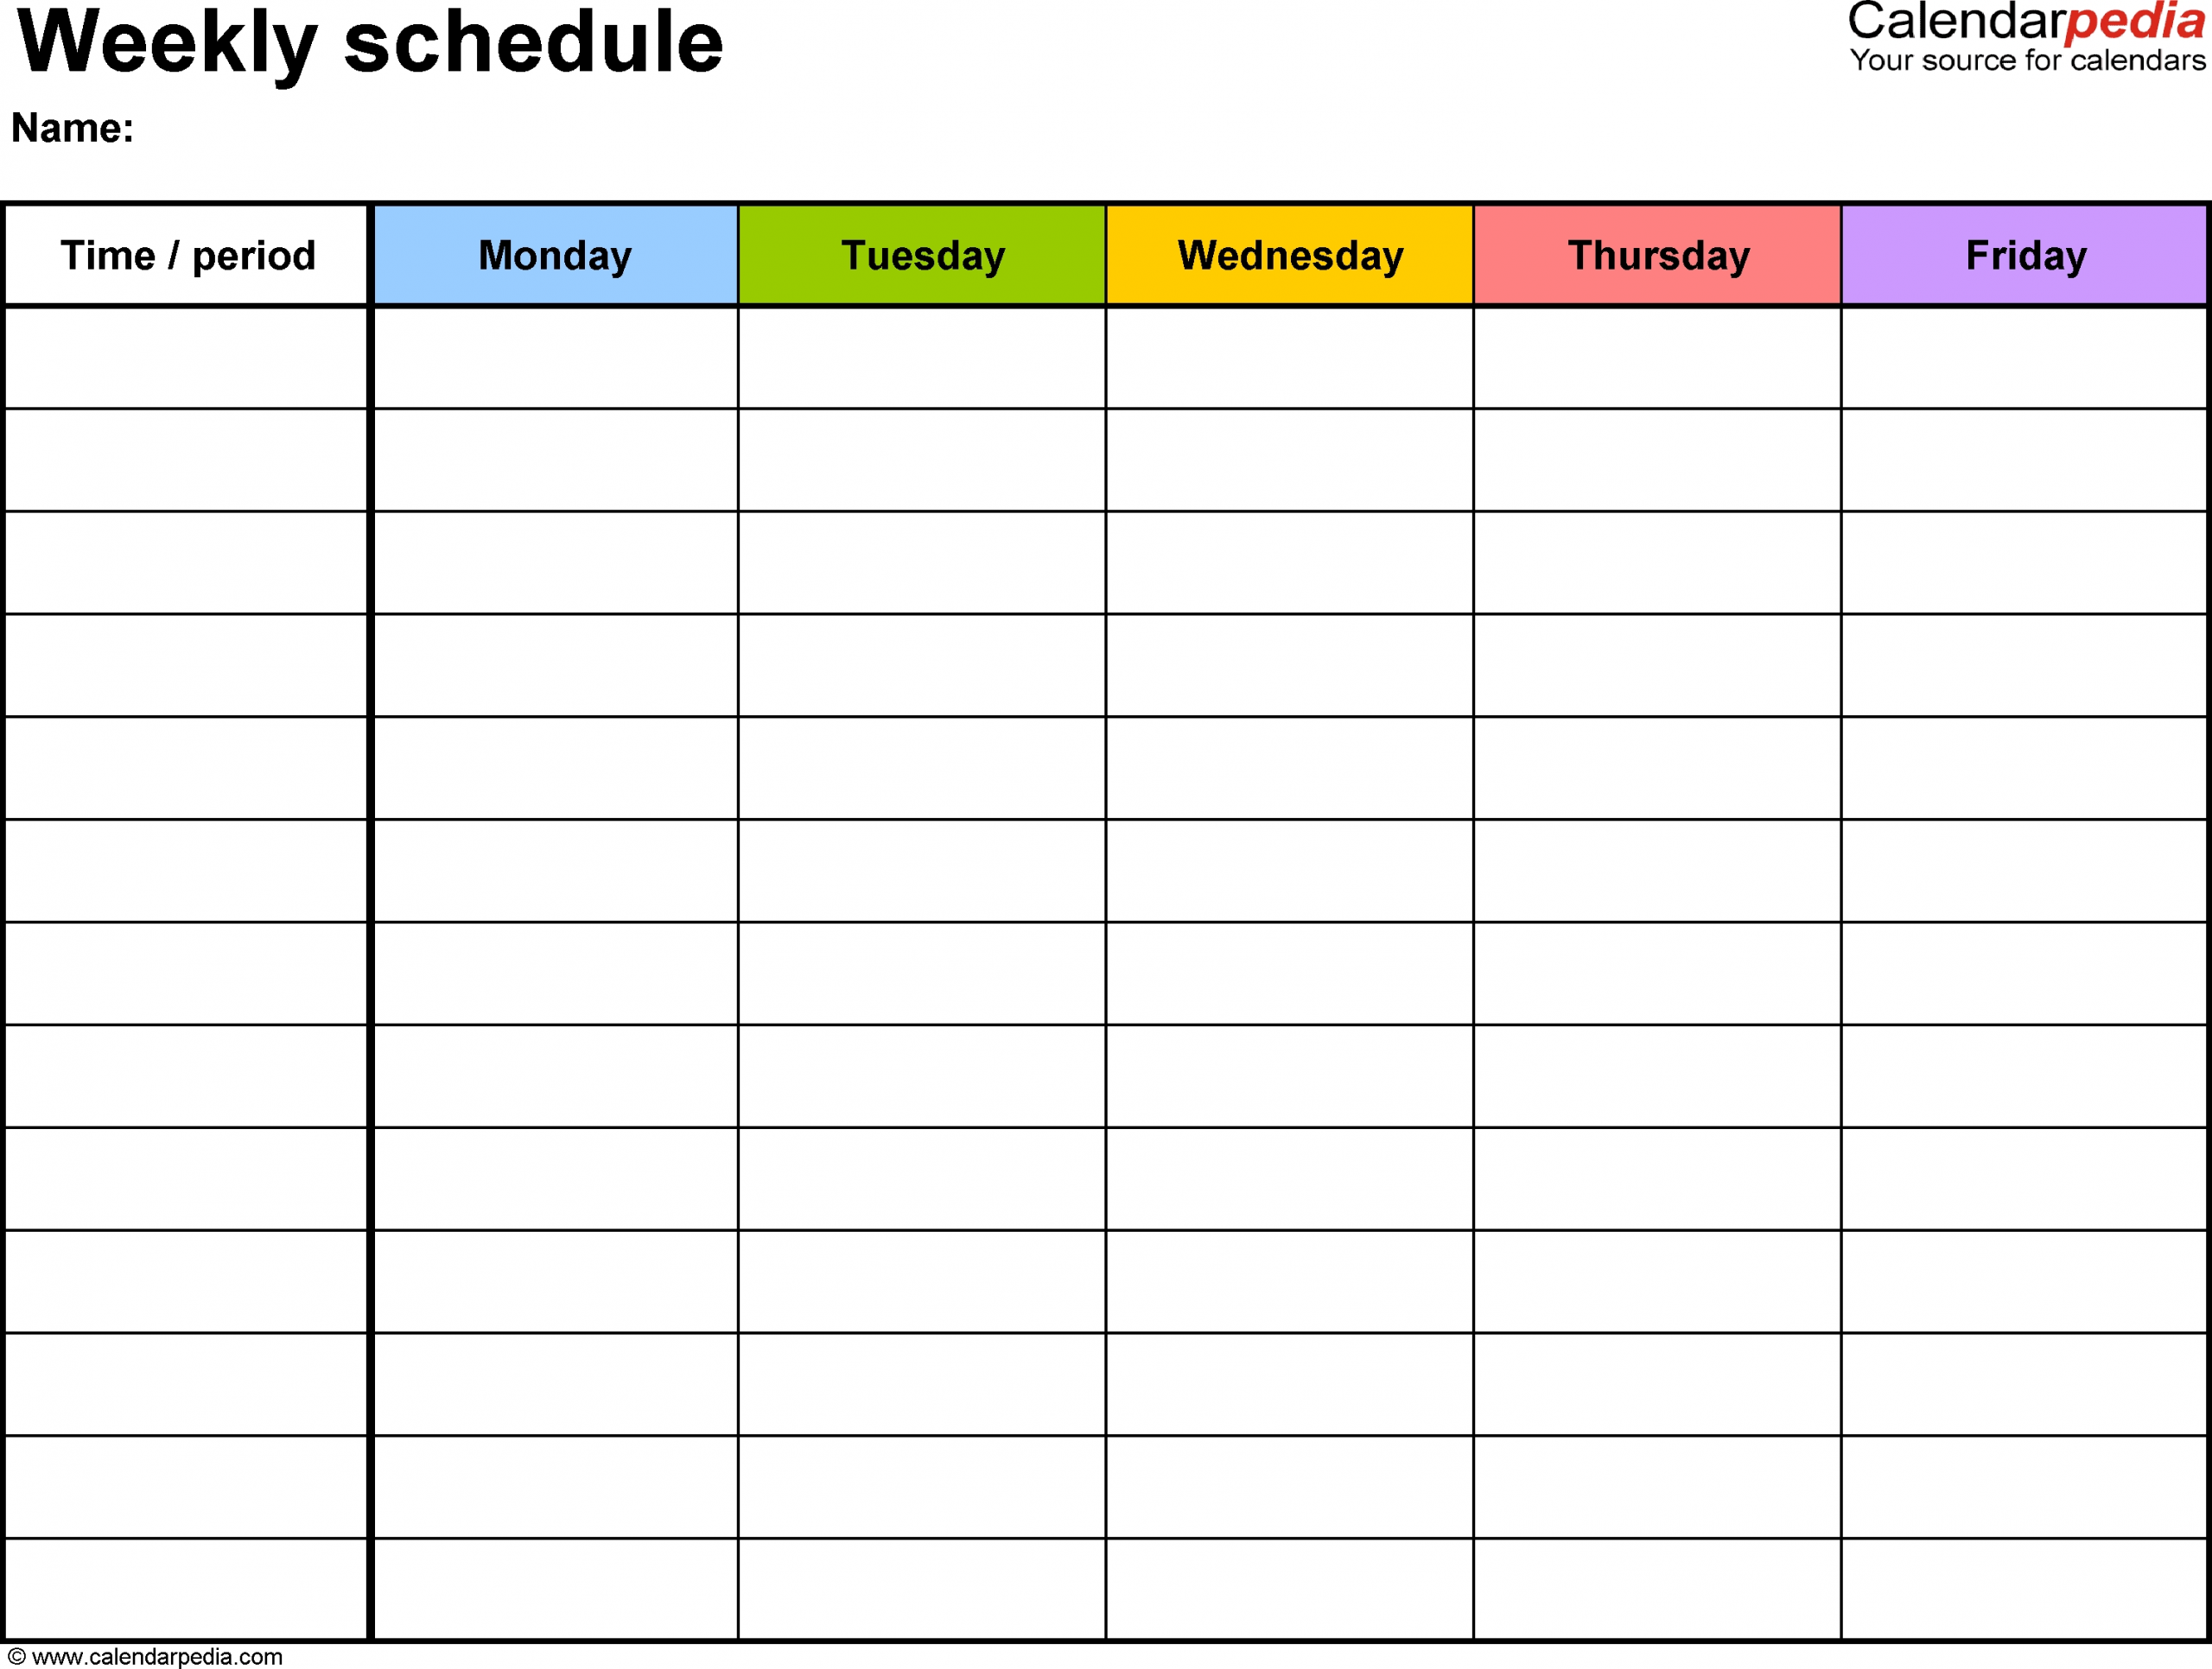 Free Weekly Schedule Templates For Word - 18 Templates with Day 7 Weekly Planner Template